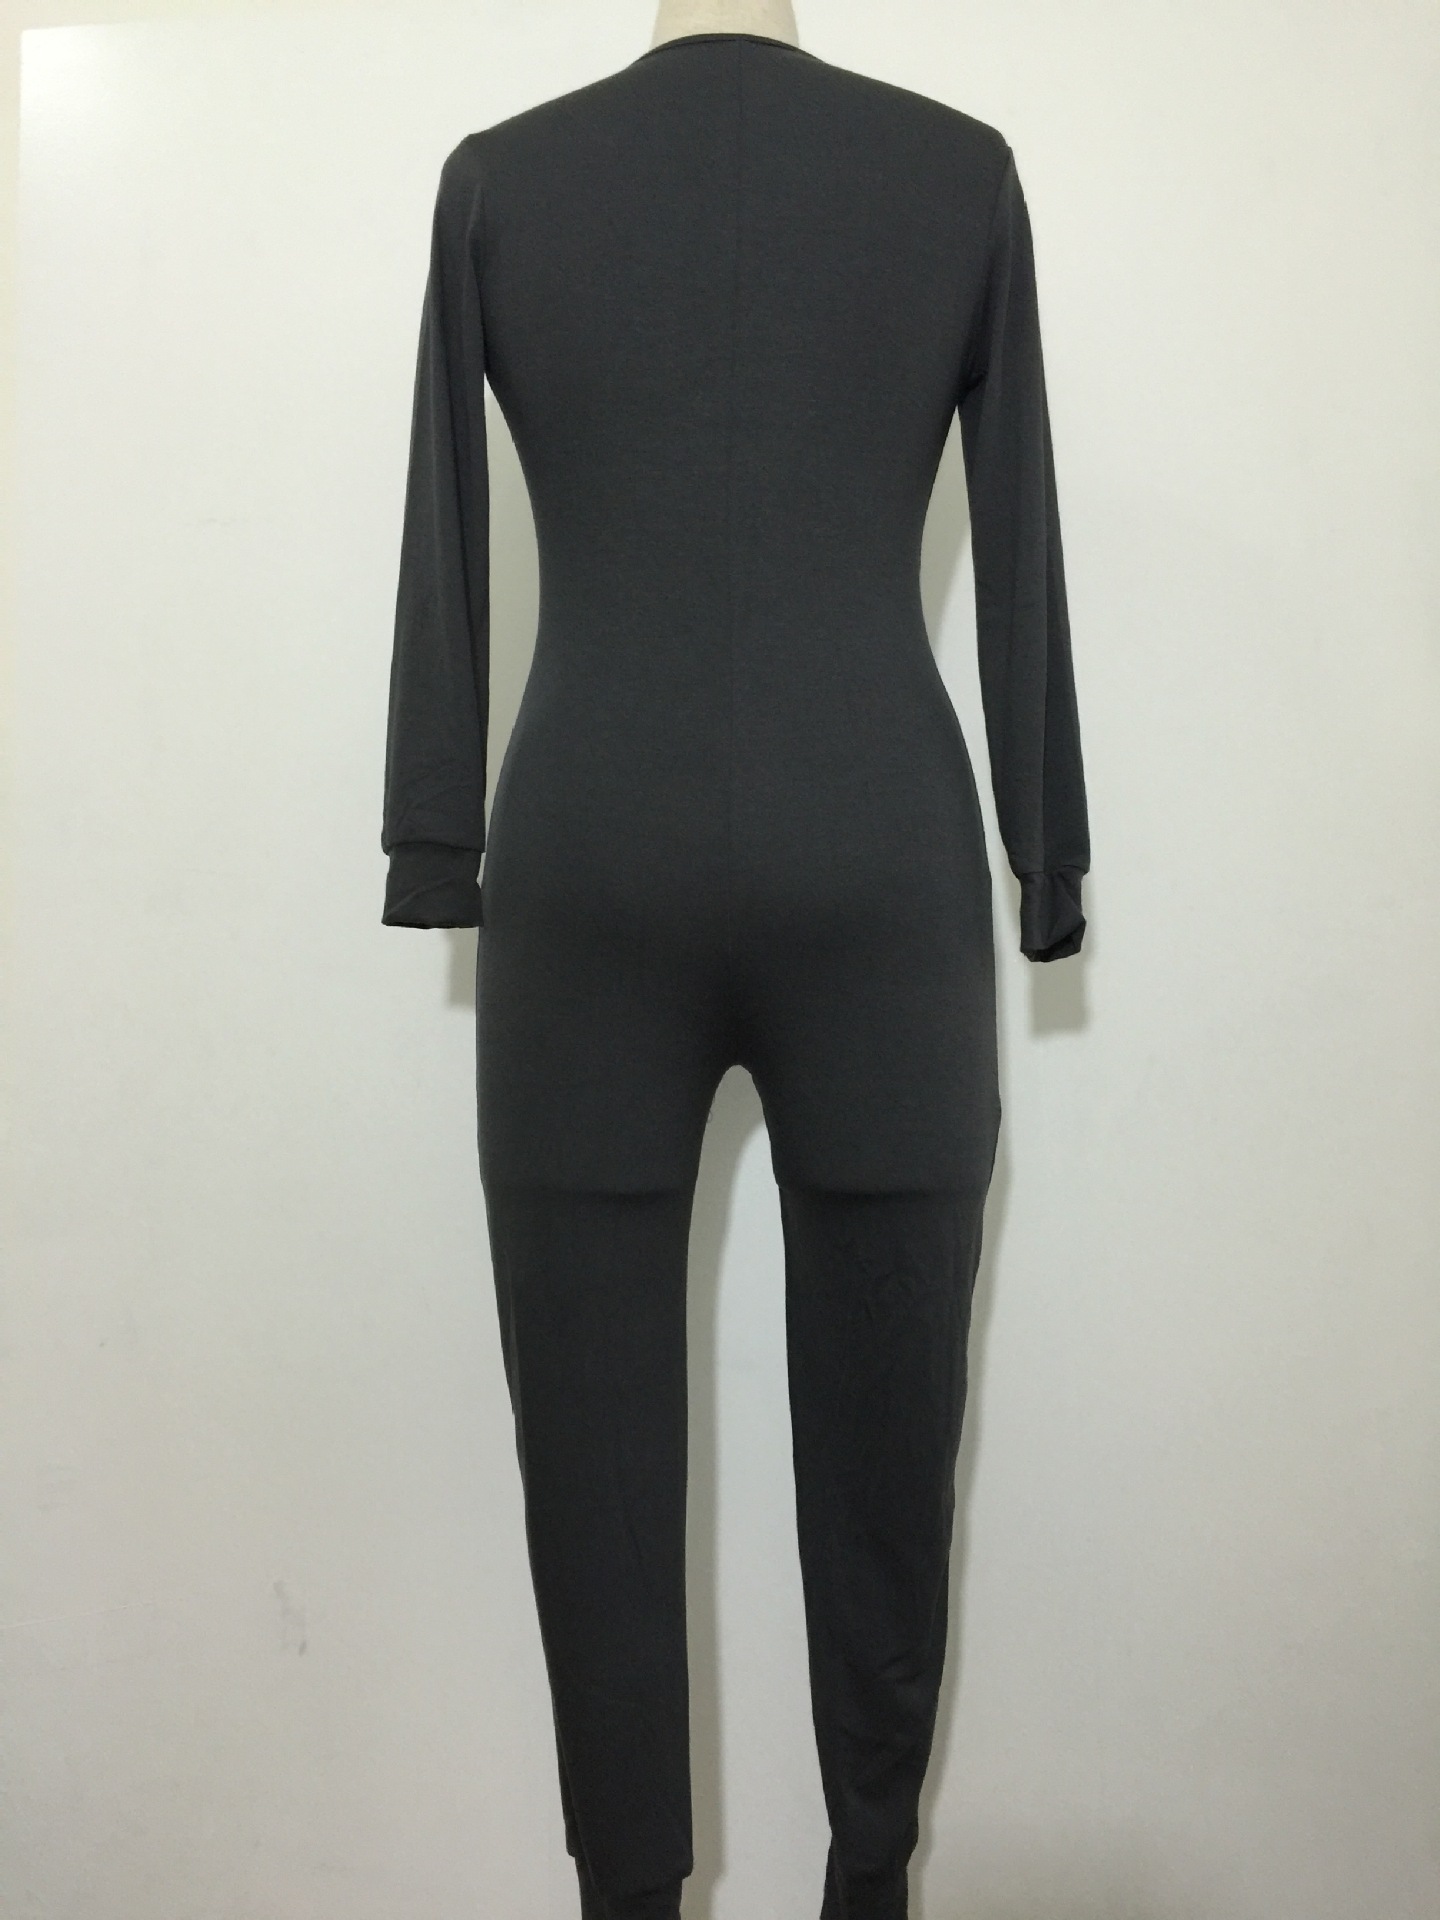 Slim V Neck Long Sleeves Single-breasted Water Black Cotton Blend One-piece Skinny Jumpsuit